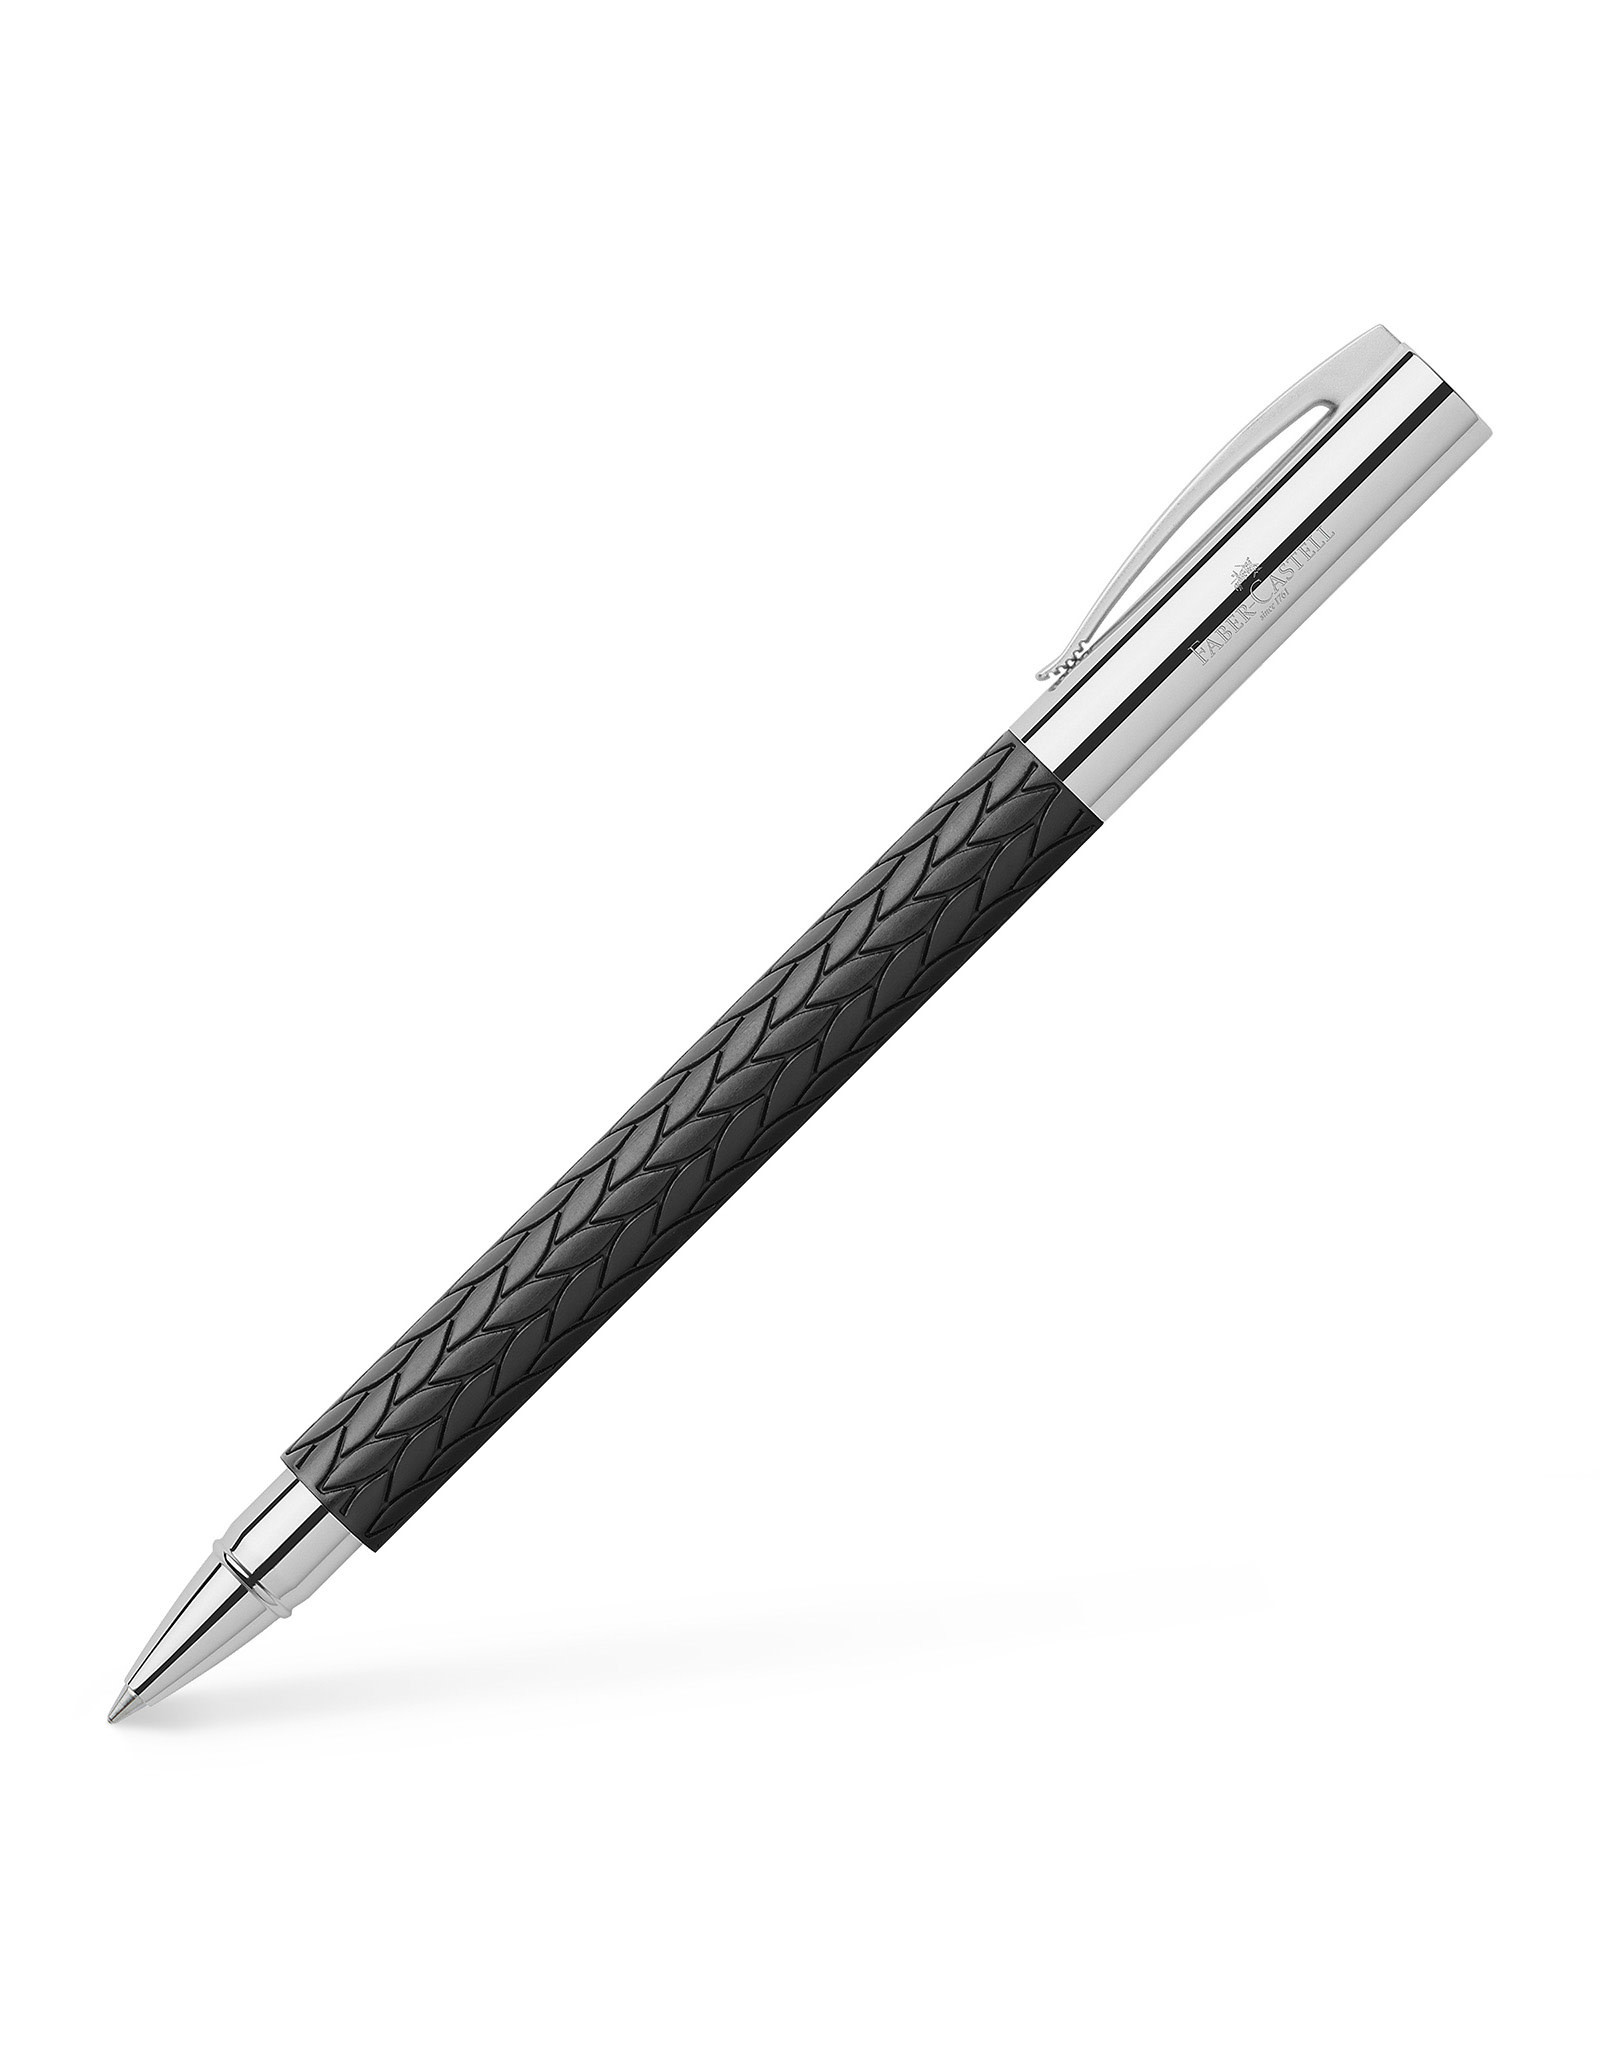 FABER-CASTELL Ambition 3D Rollerball Pen, Leaves